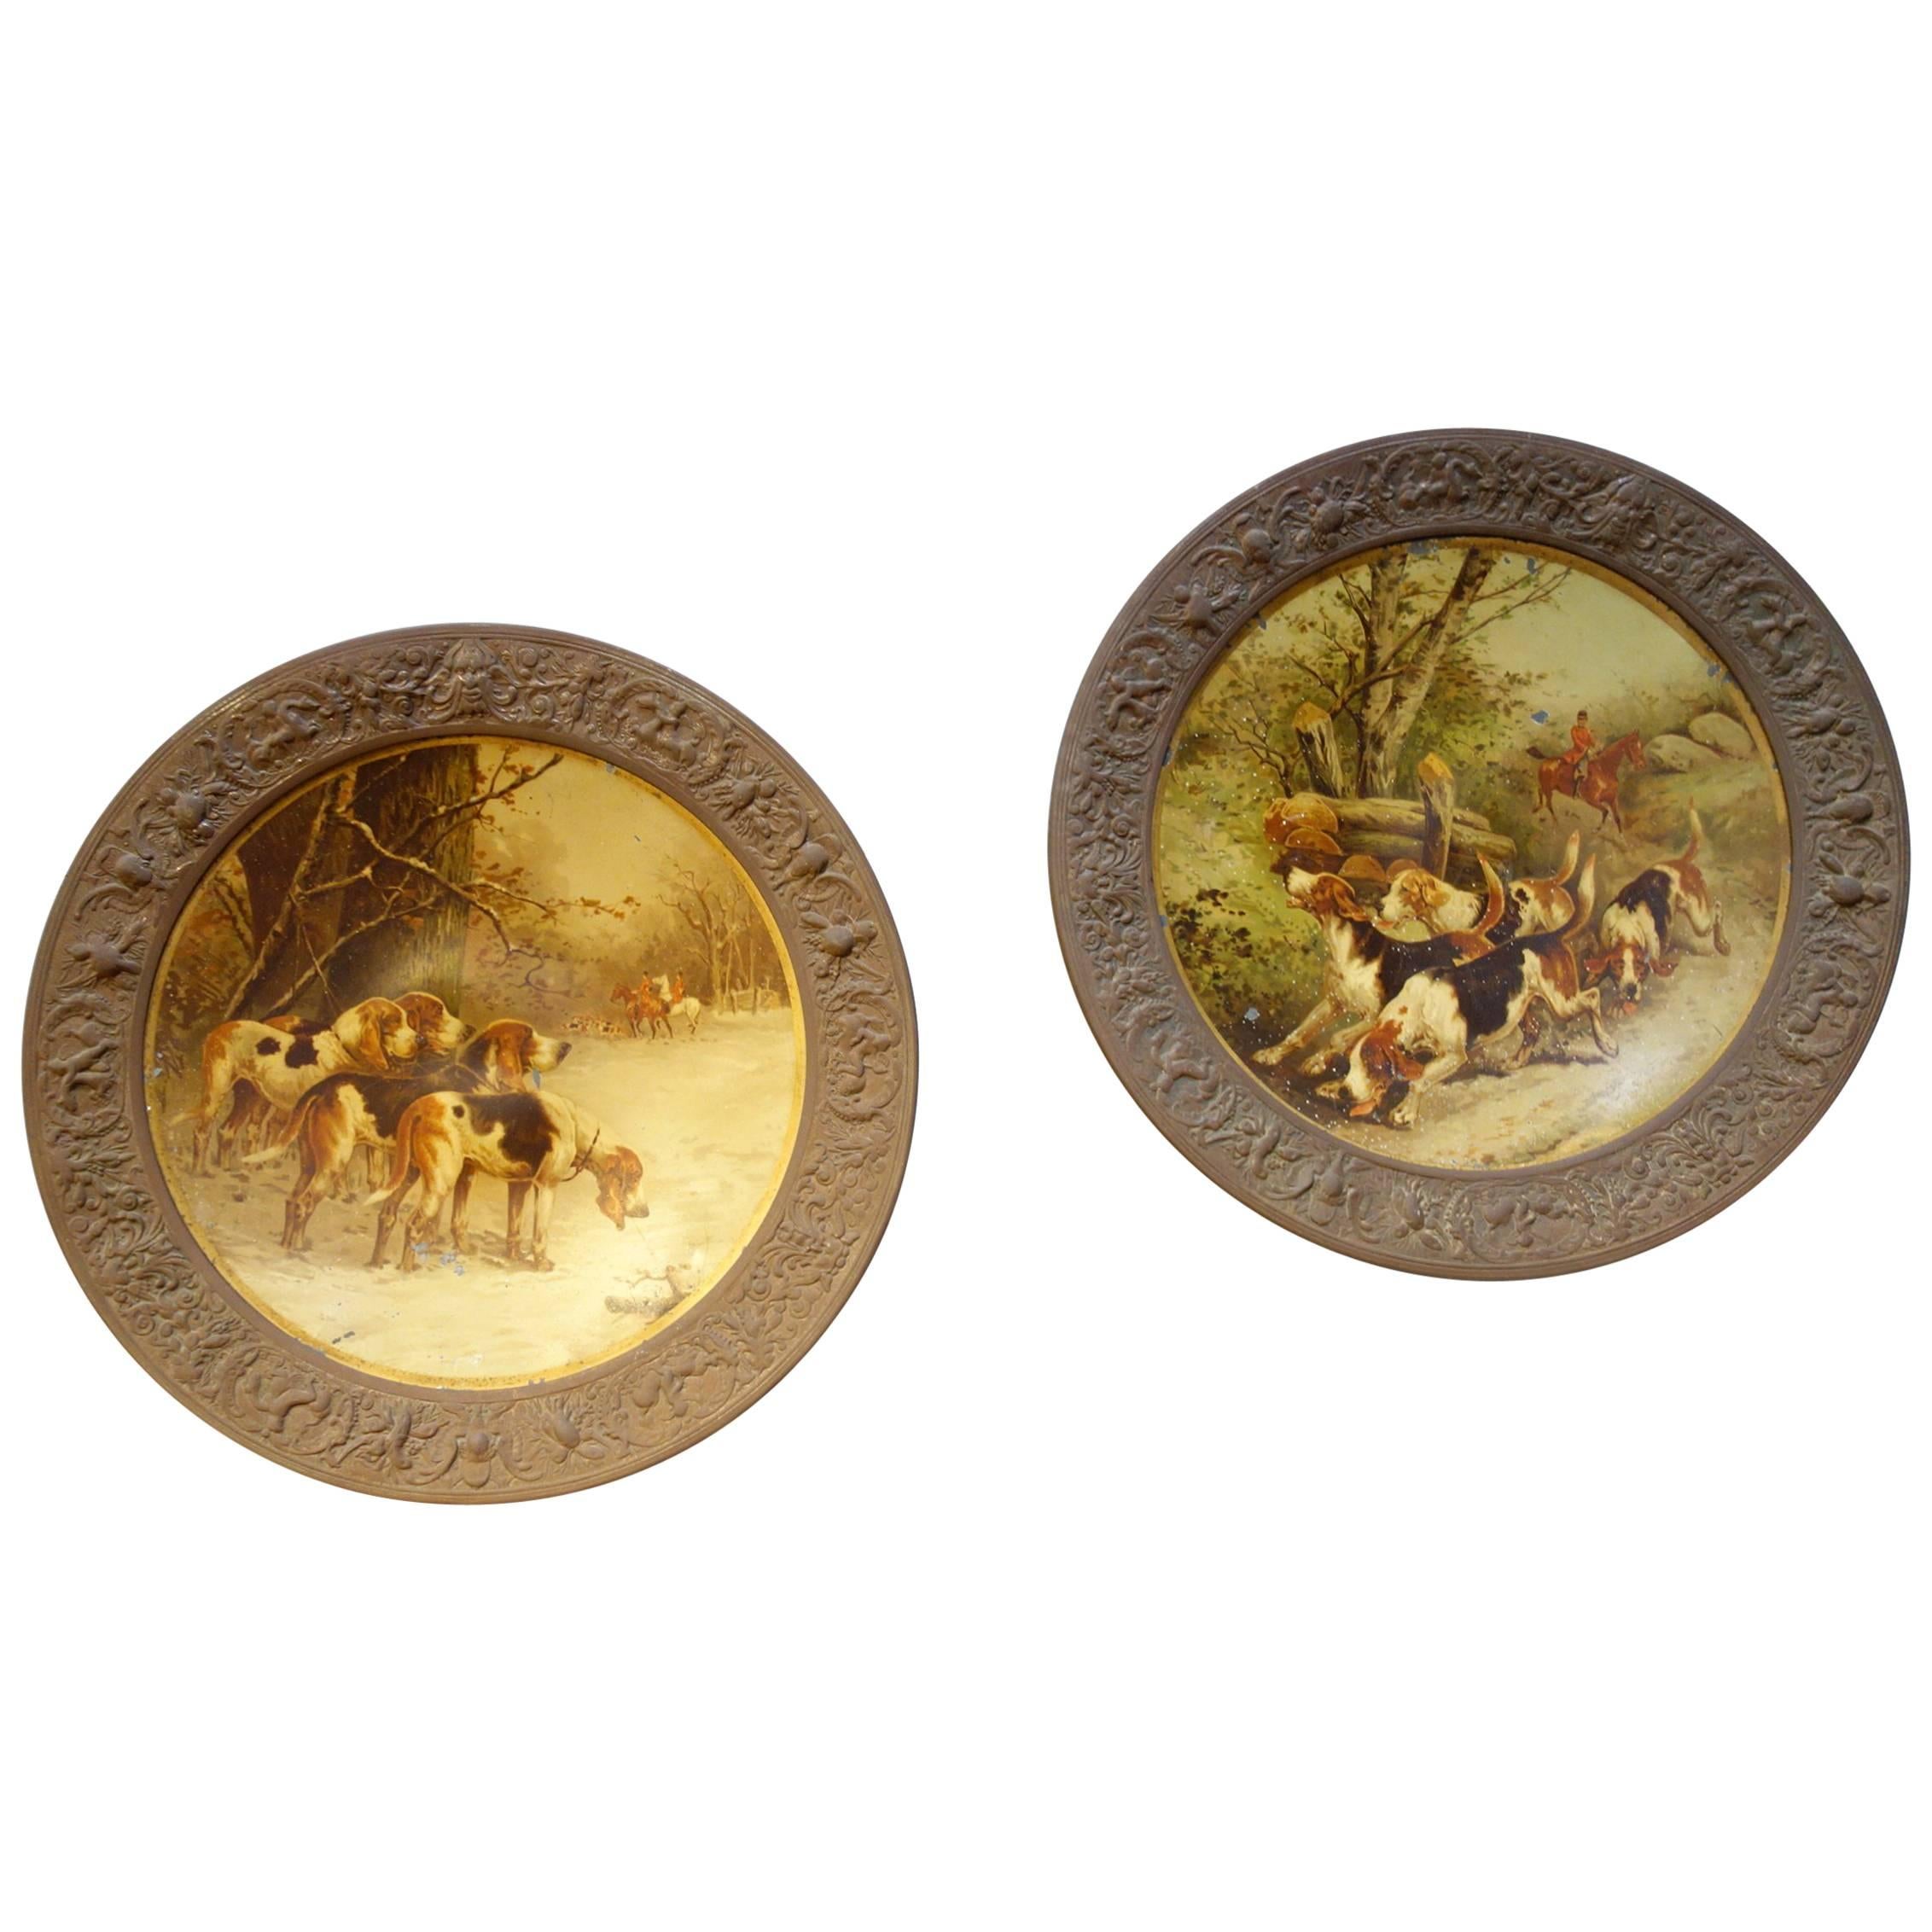 Pair of Early 19th Century Art Antique Hunting Scenes on Concave Tin Plates 1850